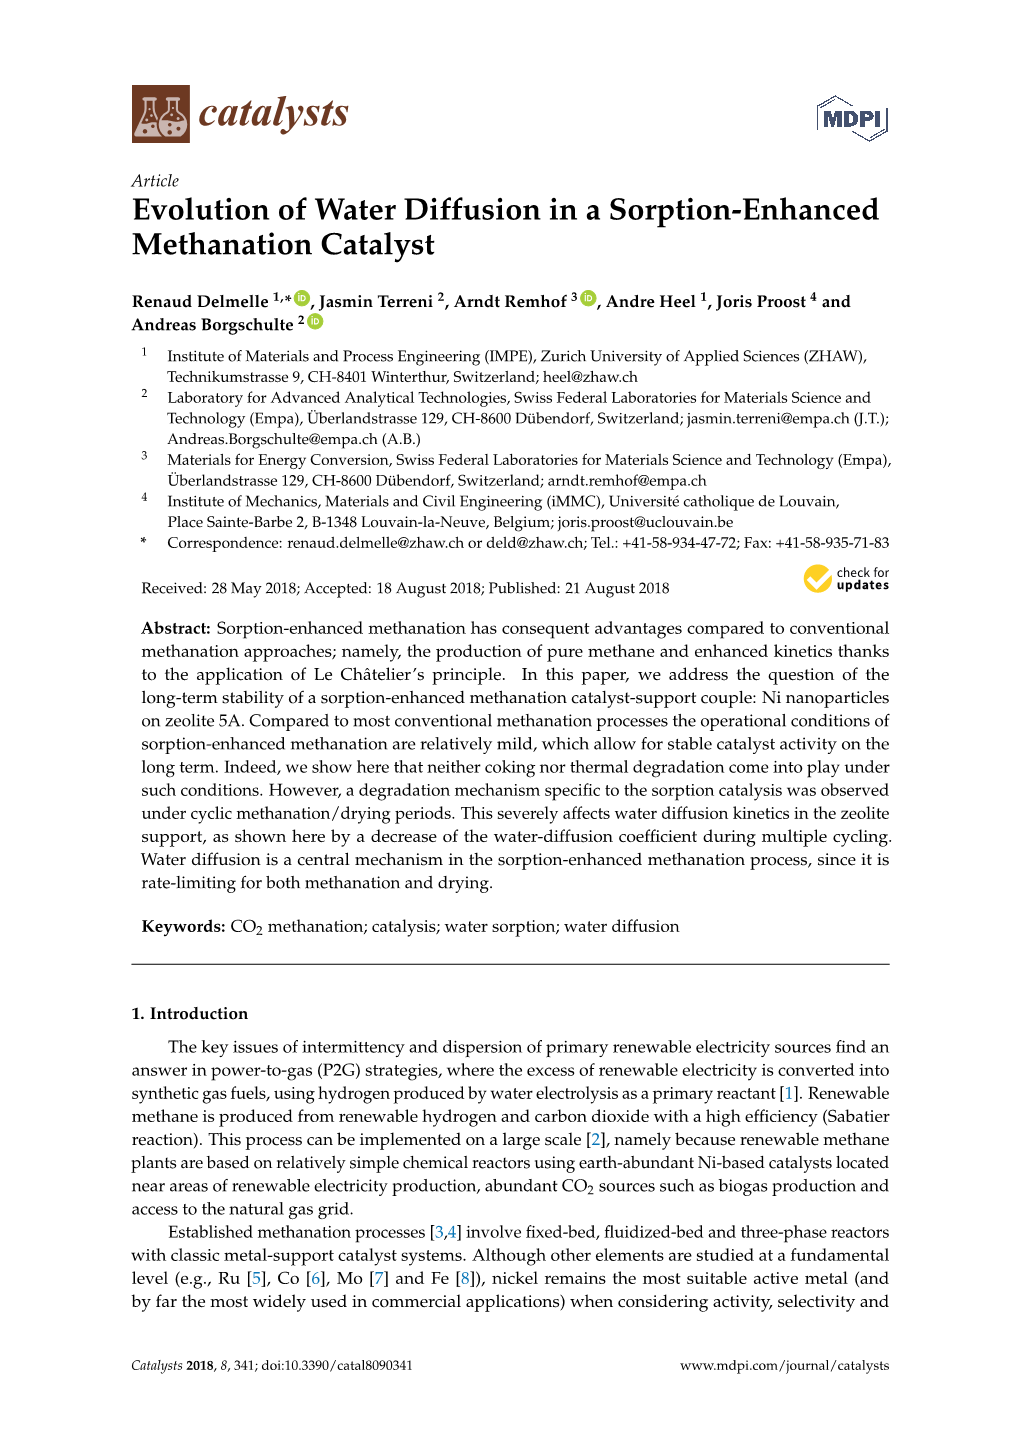 Evolution of Water Diffusion in a Sorption-Enhanced Methanation Catalyst